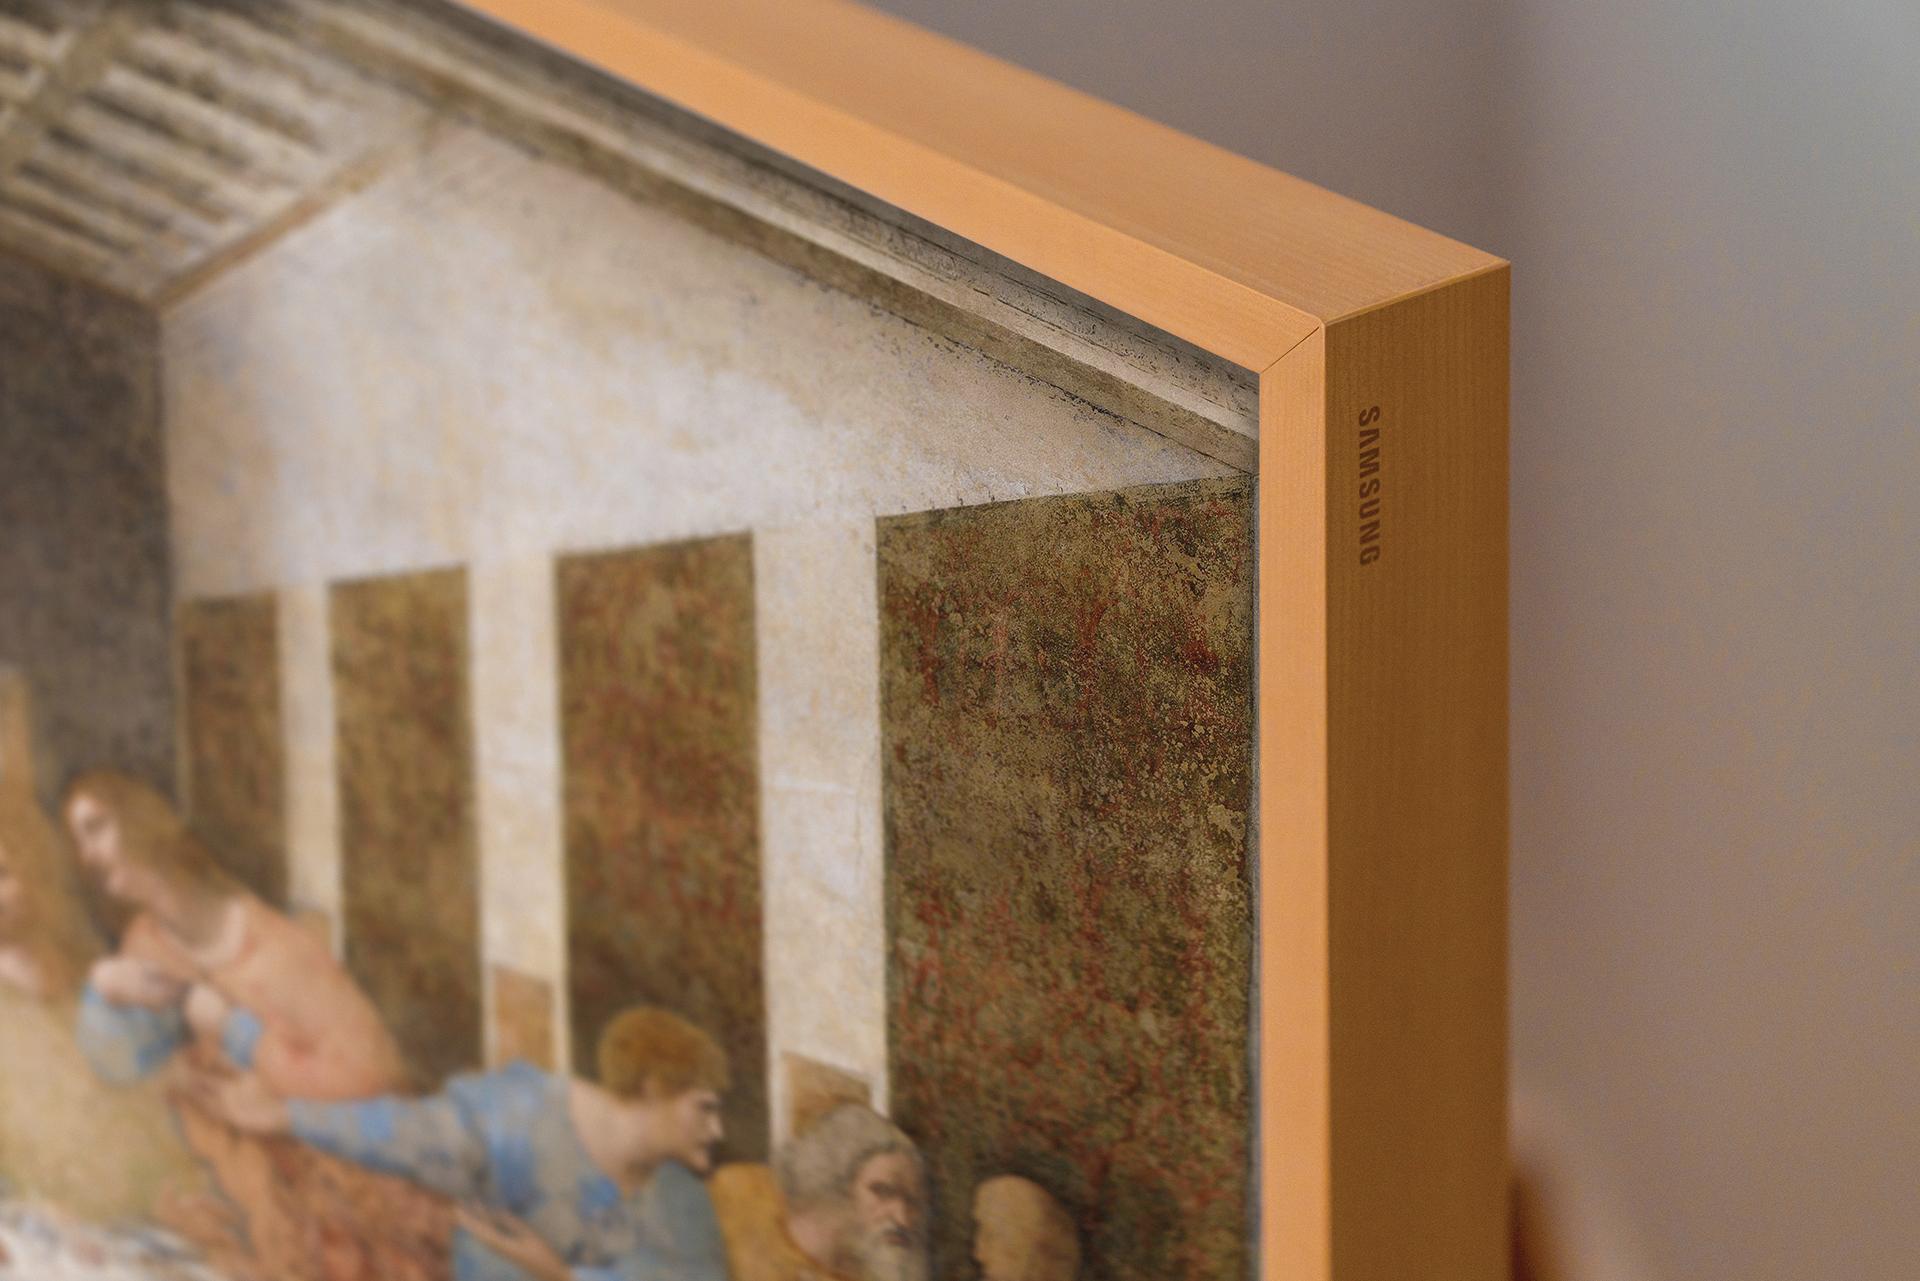 The Frame TV by Samsung Turns Your Home Into an Art Gallery 